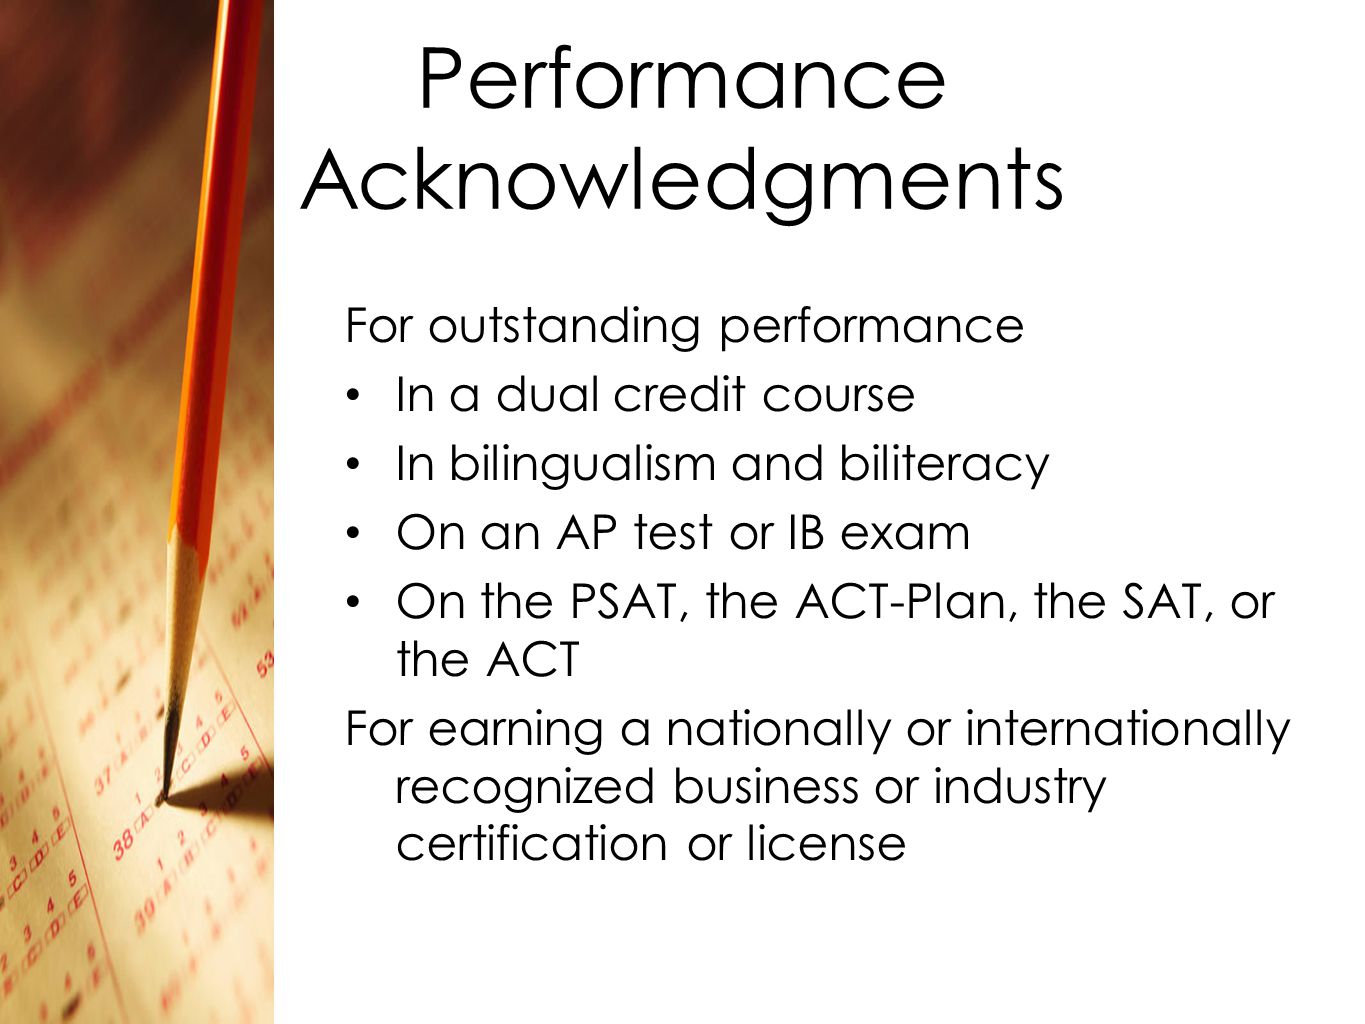 Performance Acknowledgments For outstanding performance In a dual credit course In bilingualism and biliteracy On an AP test or IB exam On the PSAT, the ACT-Plan, the SAT, or the ACT For earning a nationally or internationally recognized business or industry certification or license